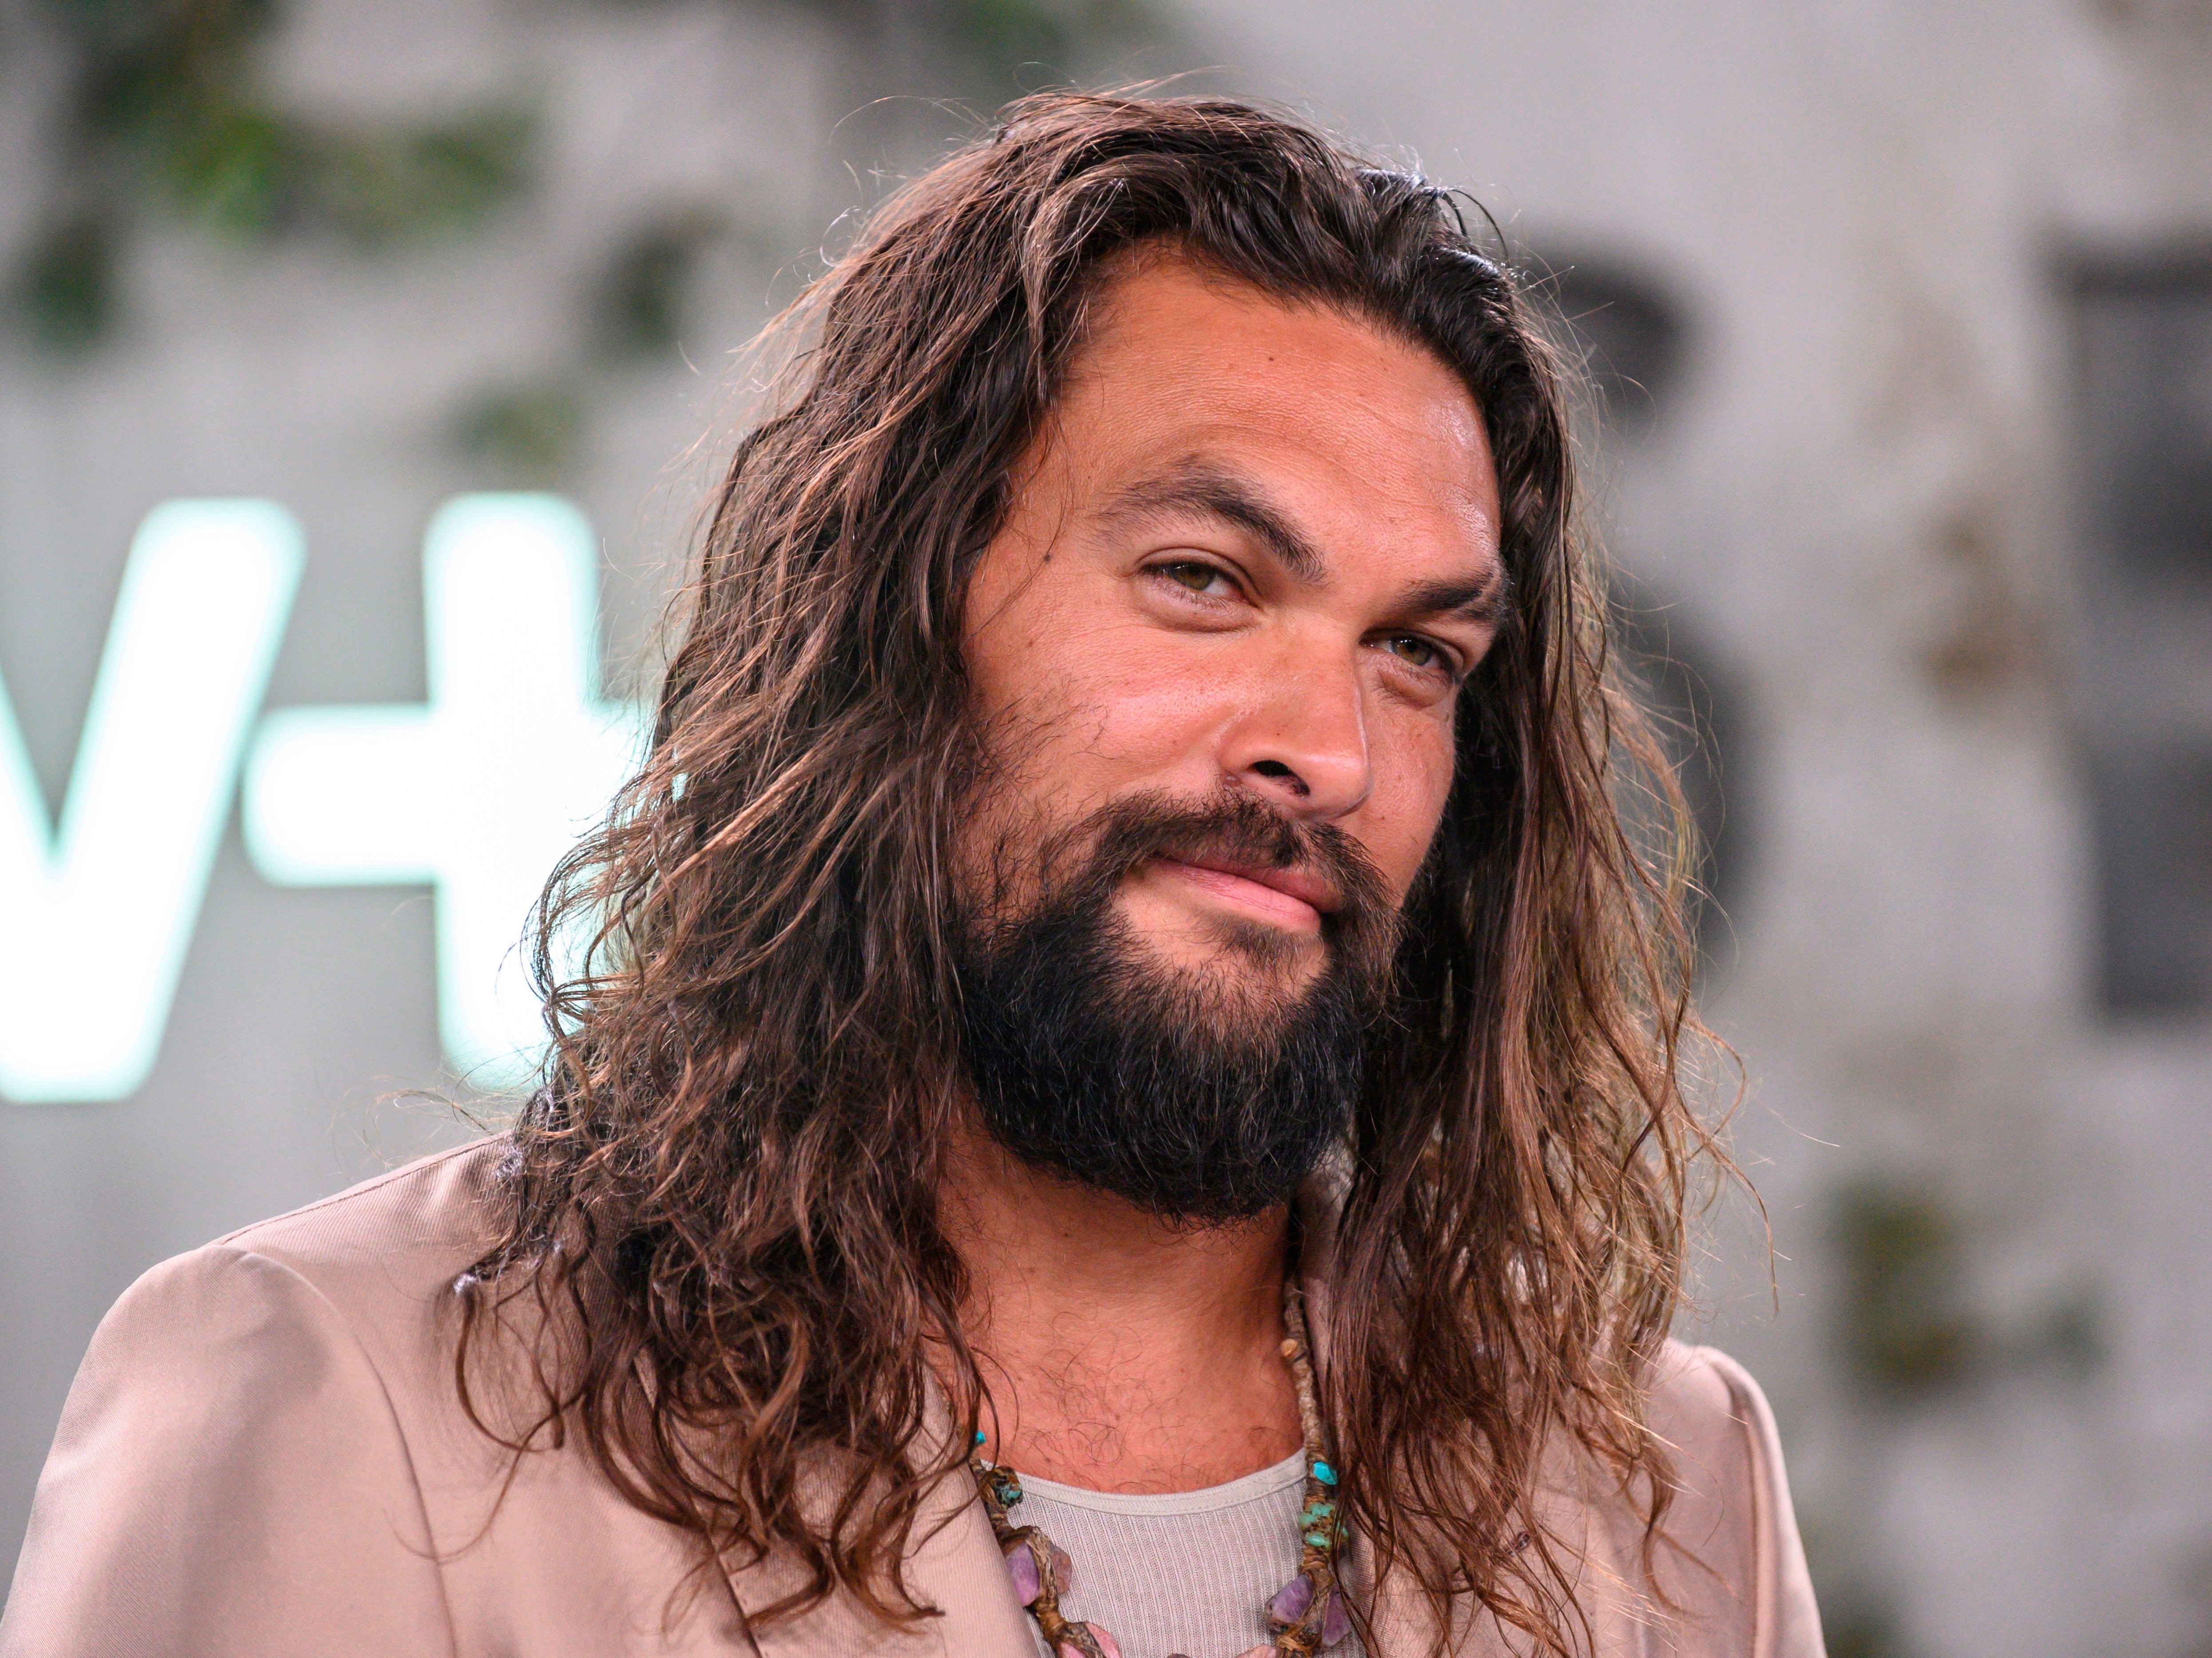 It was to Momoa’s credit that he engaged with the question in a thoughtful way. He even ended on a pretty revealing note